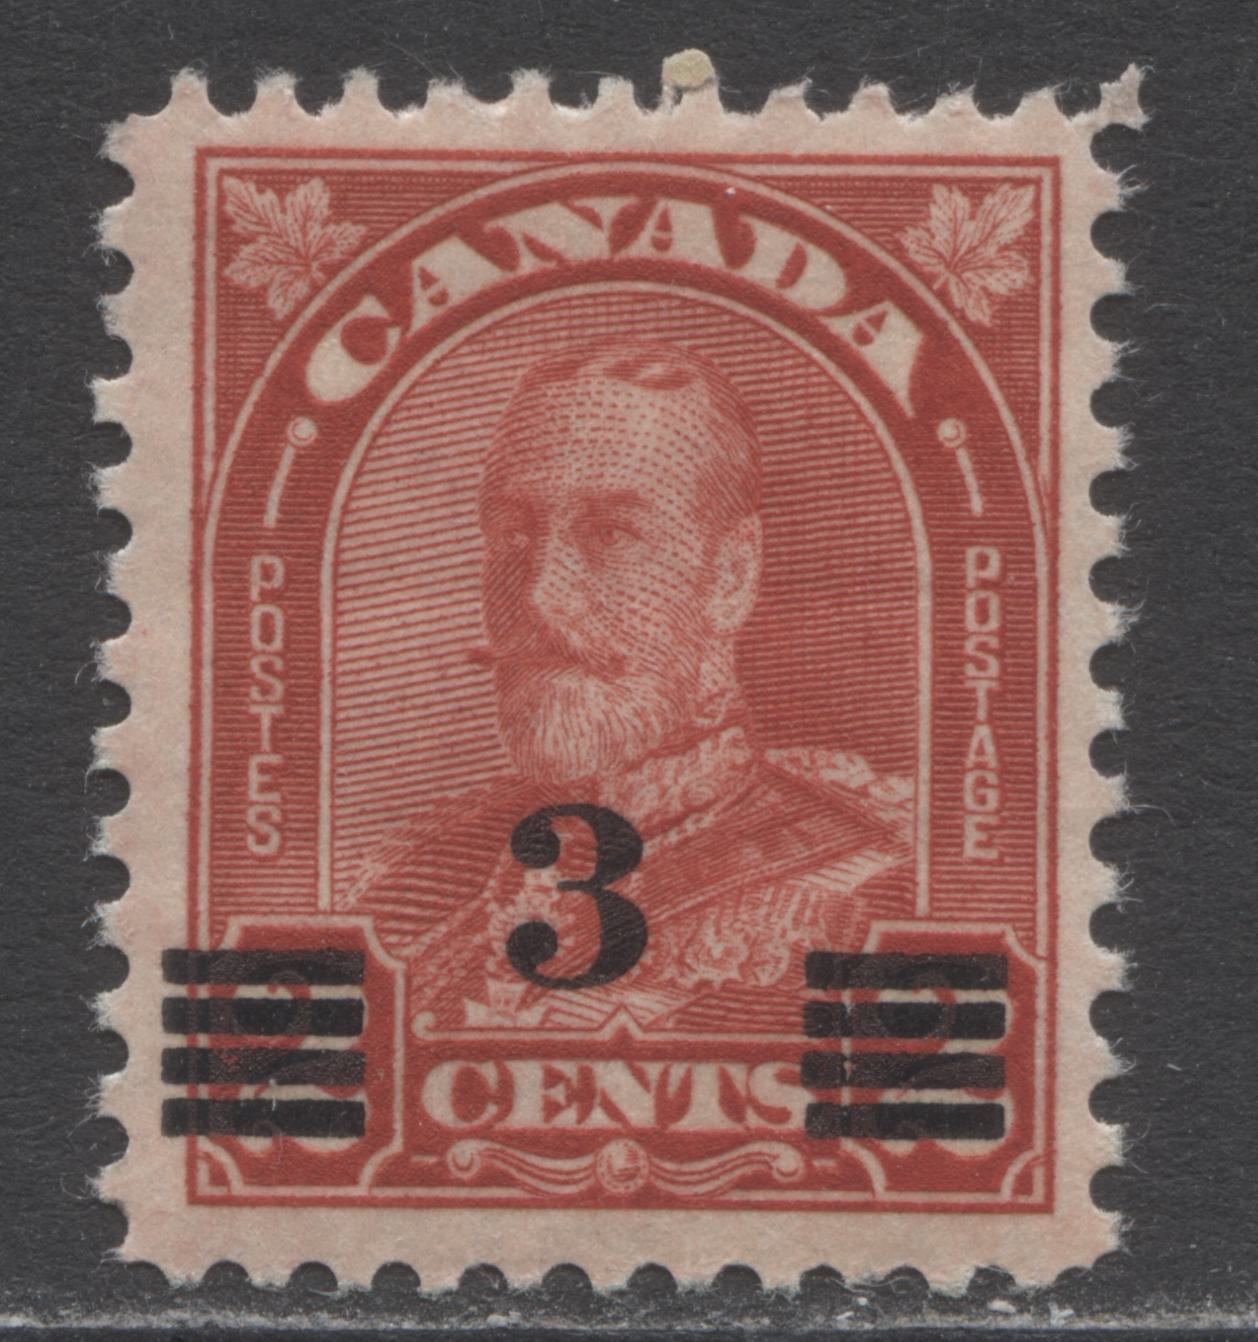 Lot 169 Canada #191i 3c On 2c Deep Red King George V, 1930-1932 Arch/Leaf Provisional Issue, A VFNH Single Showing The Extended Moustache Variety, Plate 8 LL Pos 65, Die 2